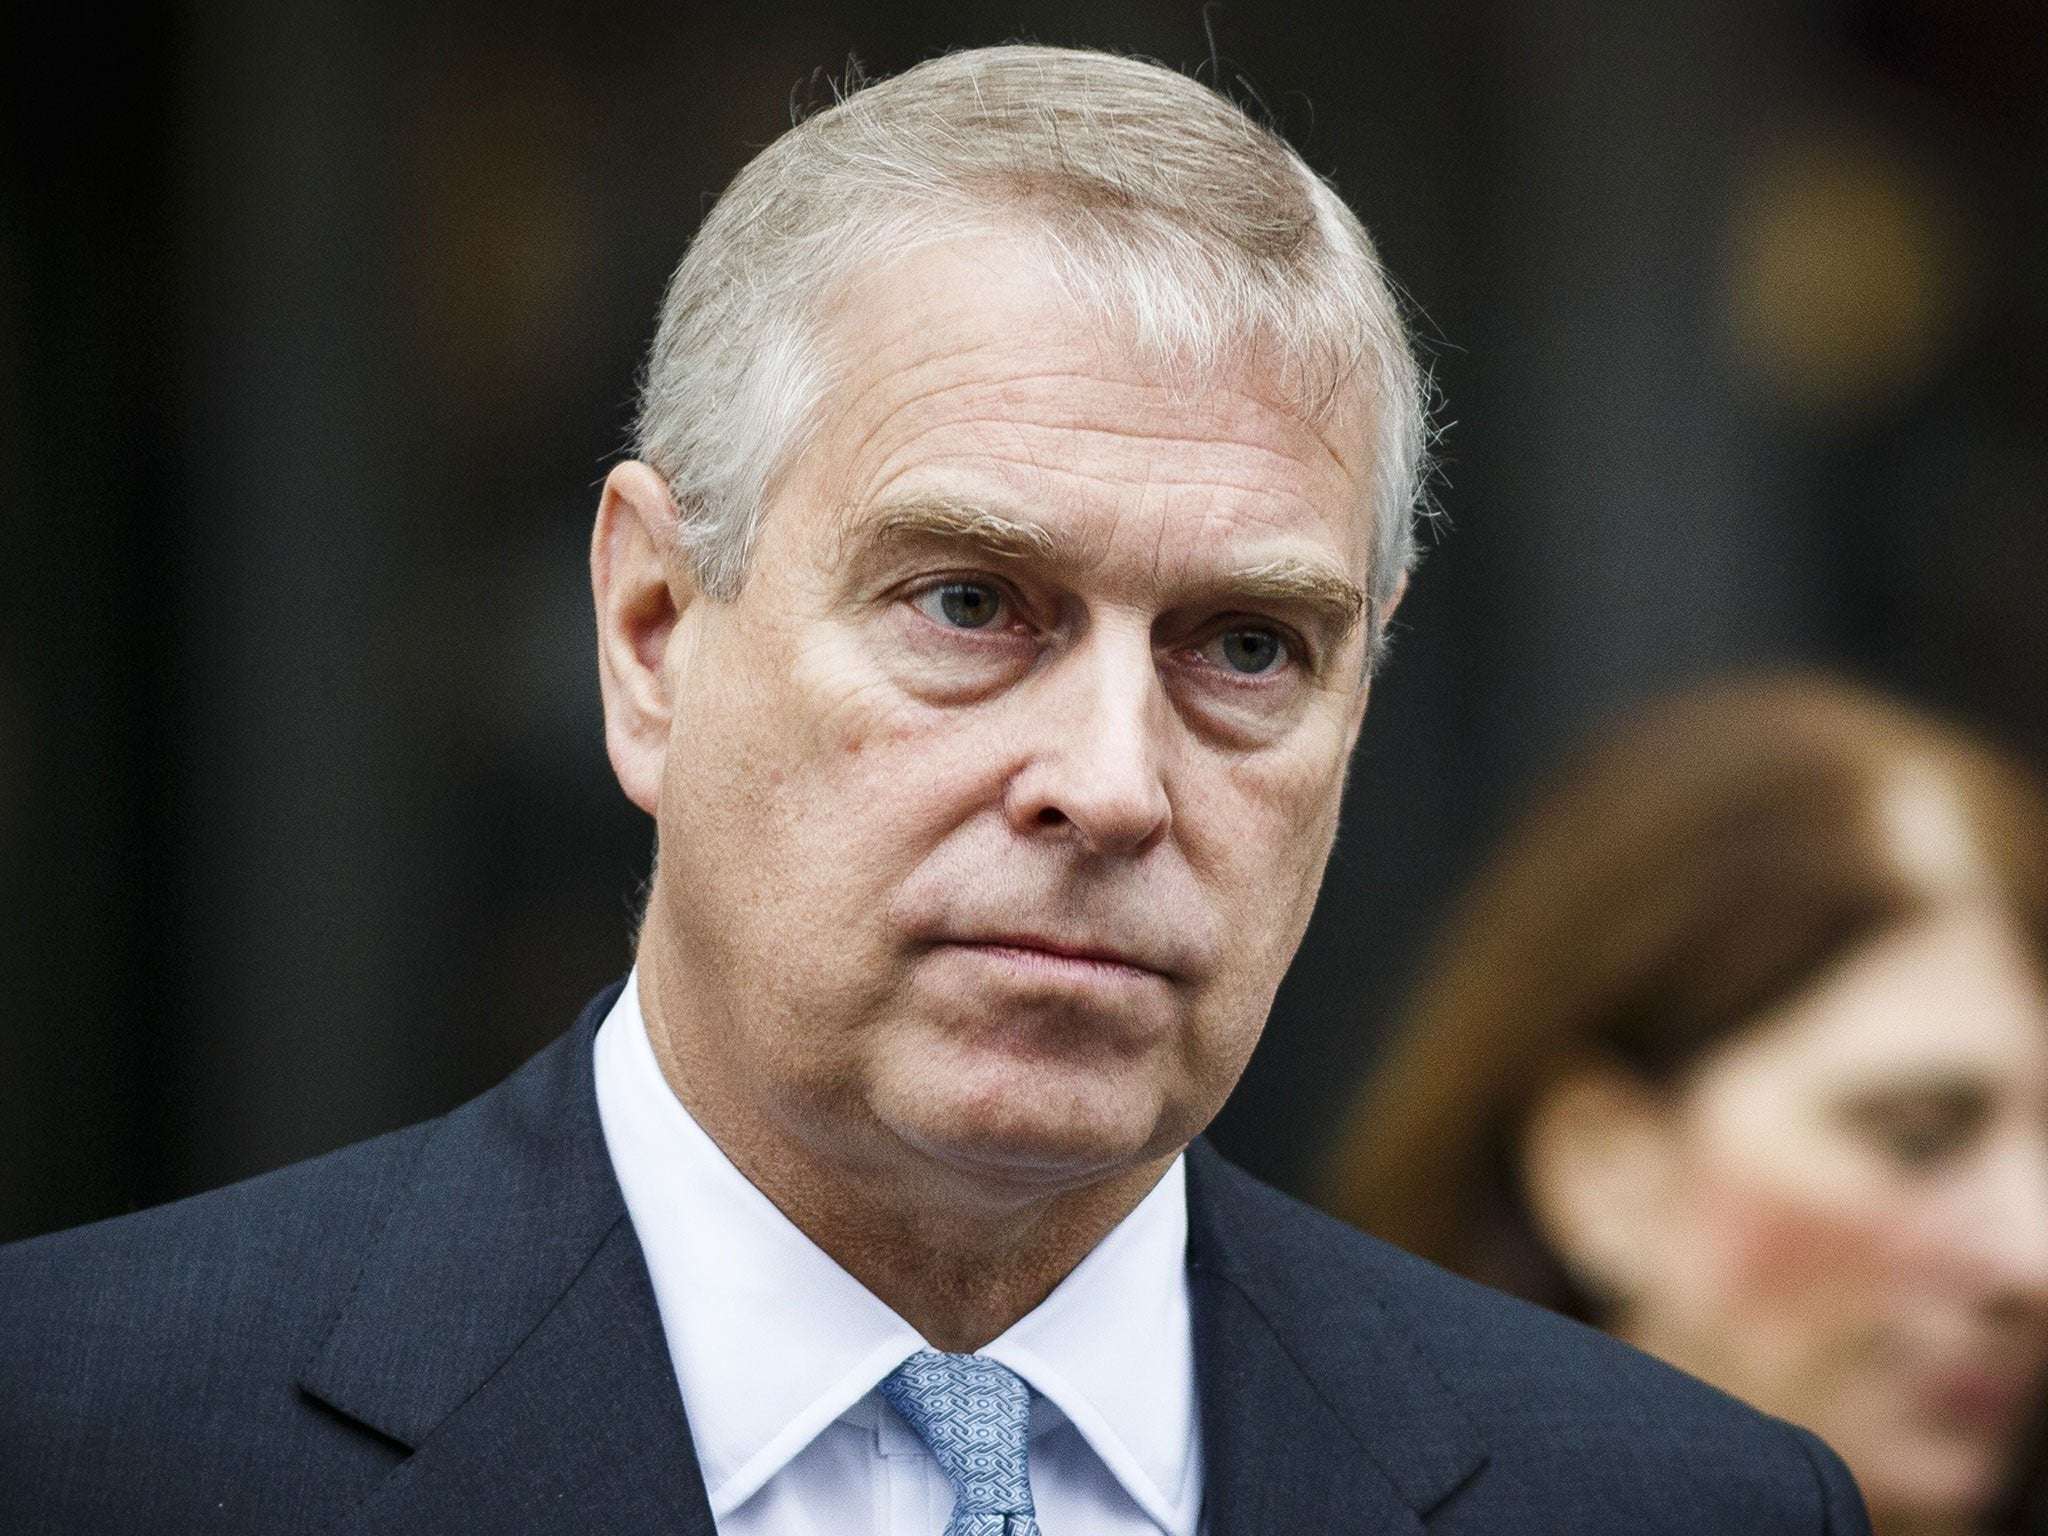 image for Prince Andrew groped young woman at flat belonging to billionaire paedophile, court documents allege